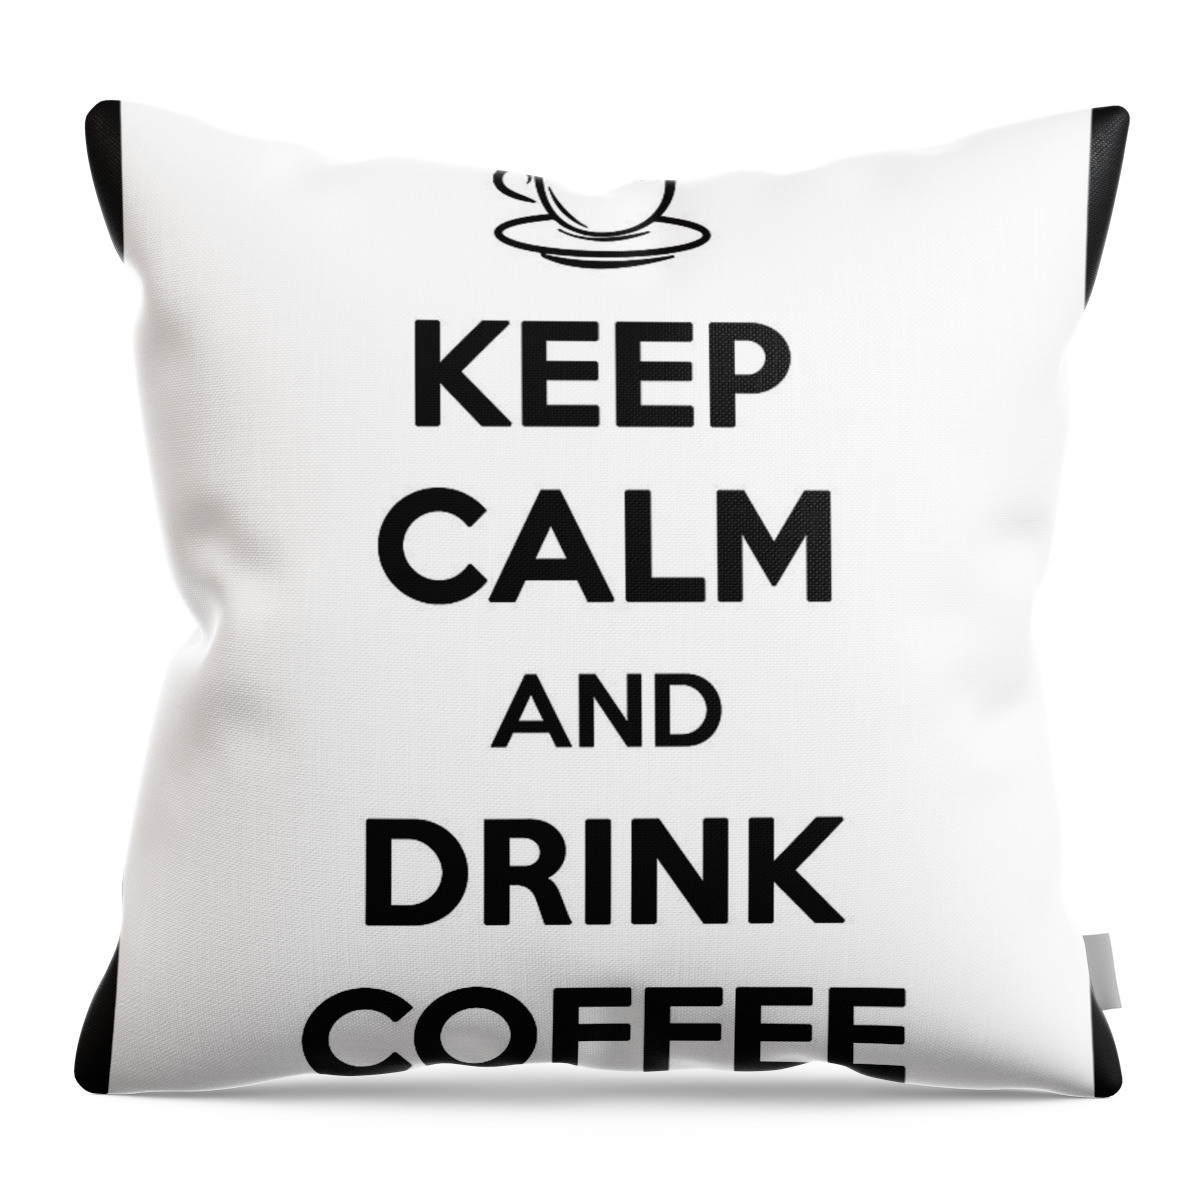 Keep Calm And Drink Coffee Poster Throw Pillow featuring the mixed media Keep Calm and Drink Coffee - Keep calm poster - Coffee Quotes - Coffee Poster - Cafe Decor by Studio Grafiikka